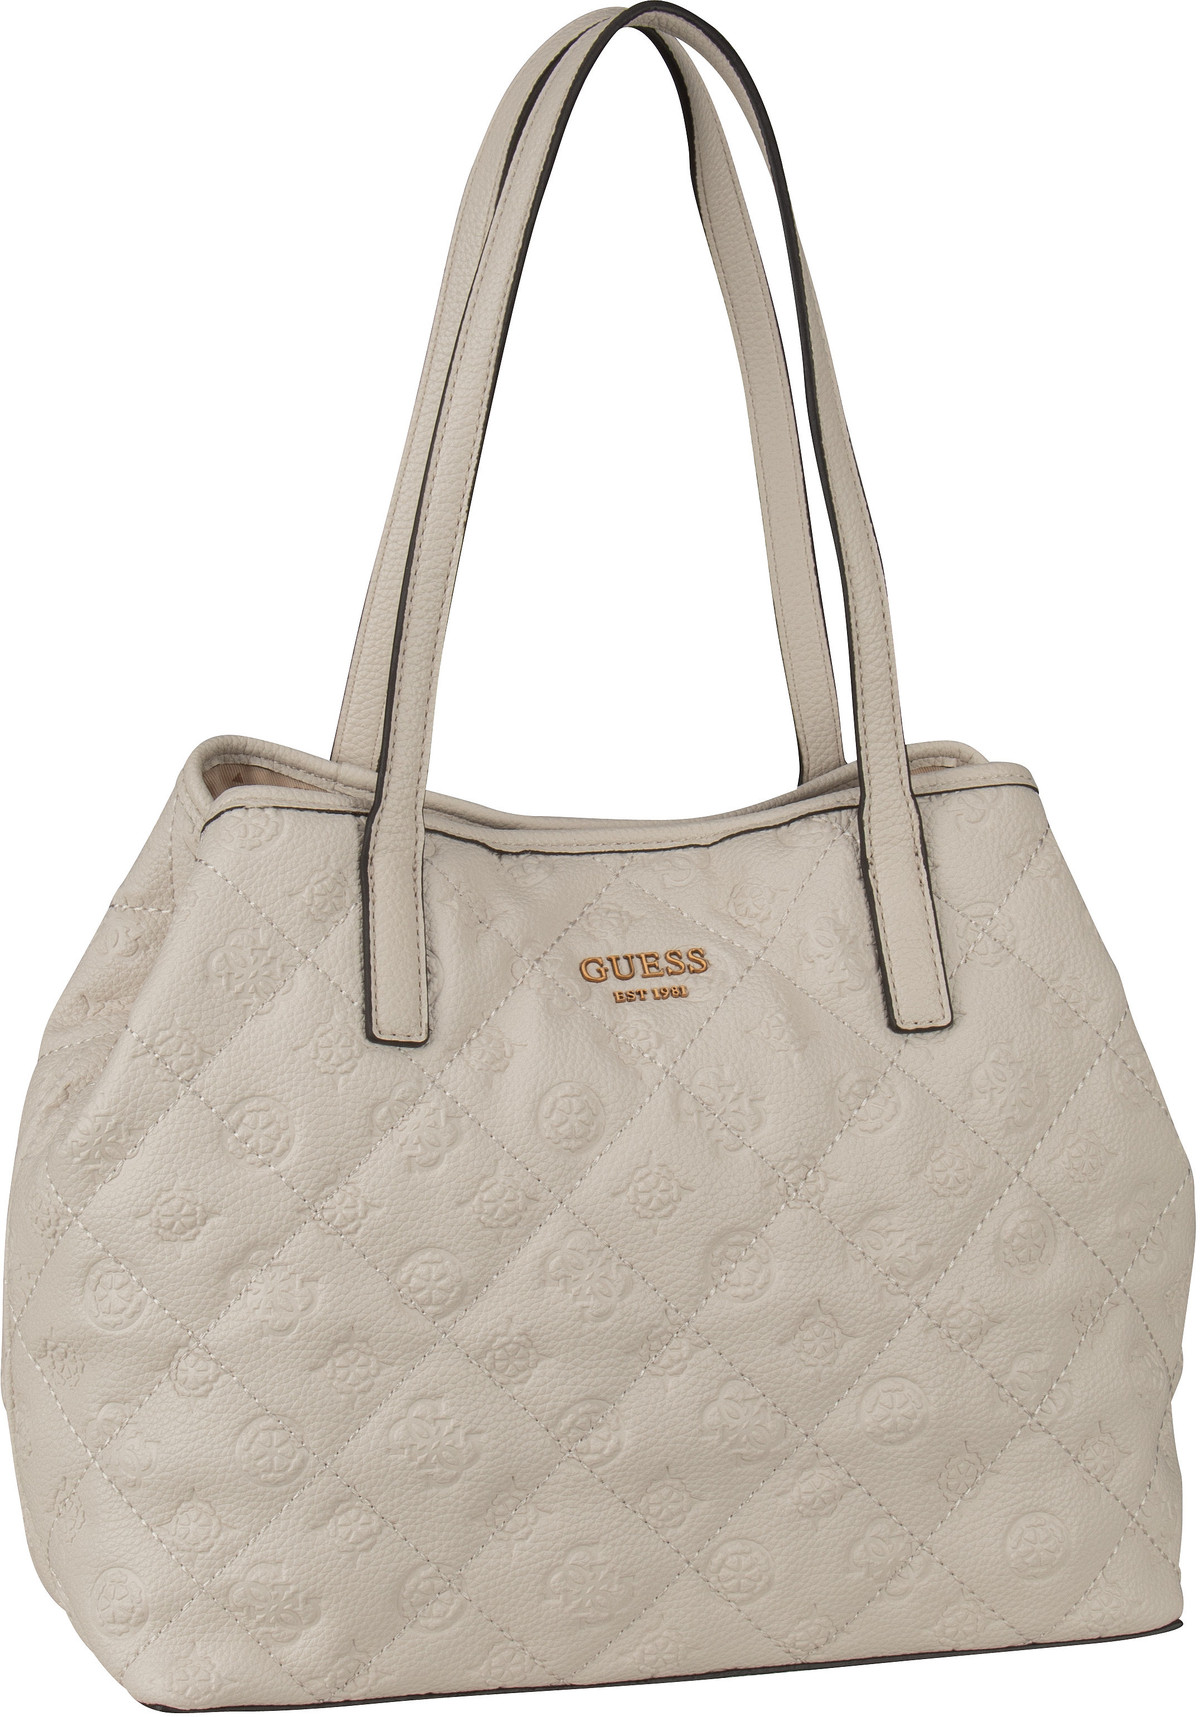 Guess Vikky Tote Quilted  in Stone (15.6 Liter), Shopper